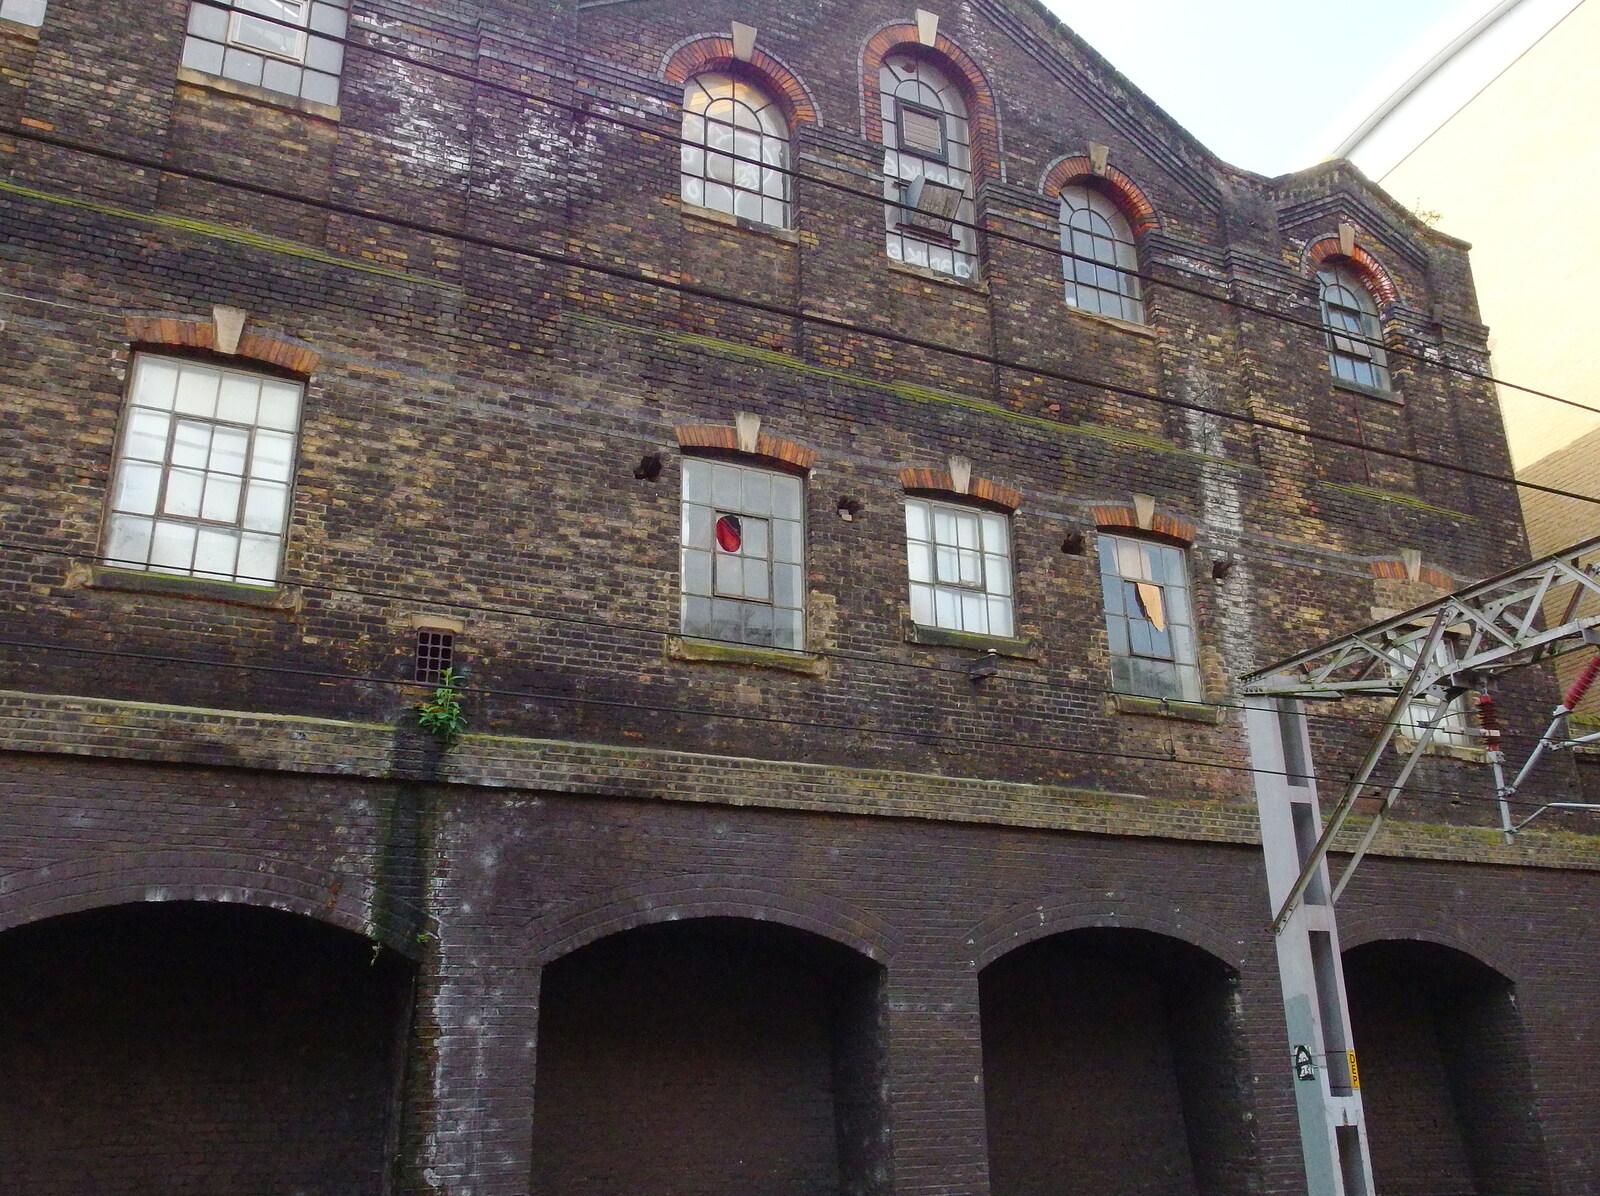 Possibly-derelict buildings from A Trainey Sort of Week, Liverpool Street, City of London - 3rd April 2014